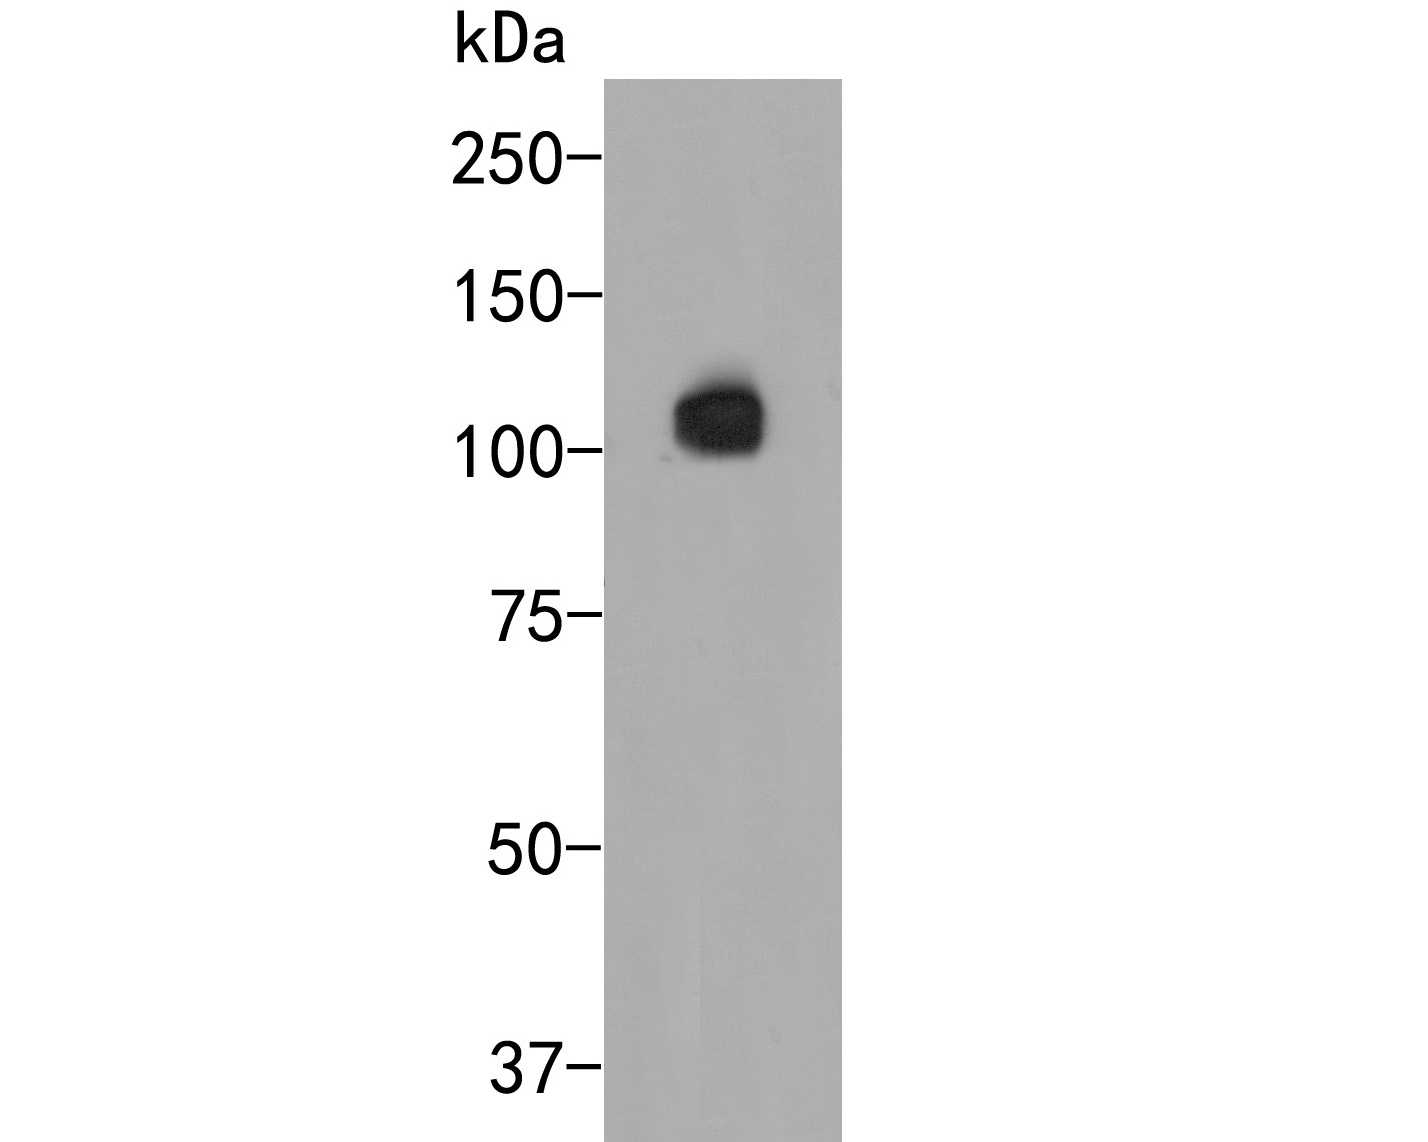 Western blot analysis of Smoothelin on PC-3M cell lysate. Proteins were transferred to a PVDF membrane and blocked with 5% BSA in PBS for 1 hour at room temperature. The primary antibody (ER2001-40, 1/500) was used in 5% BSA at room temperature for 2 hours. Goat Anti-Rabbit IgG - HRP Secondary Antibody (HA1001) at 1:5,000 dilution was used for 1 hour at room temperature.